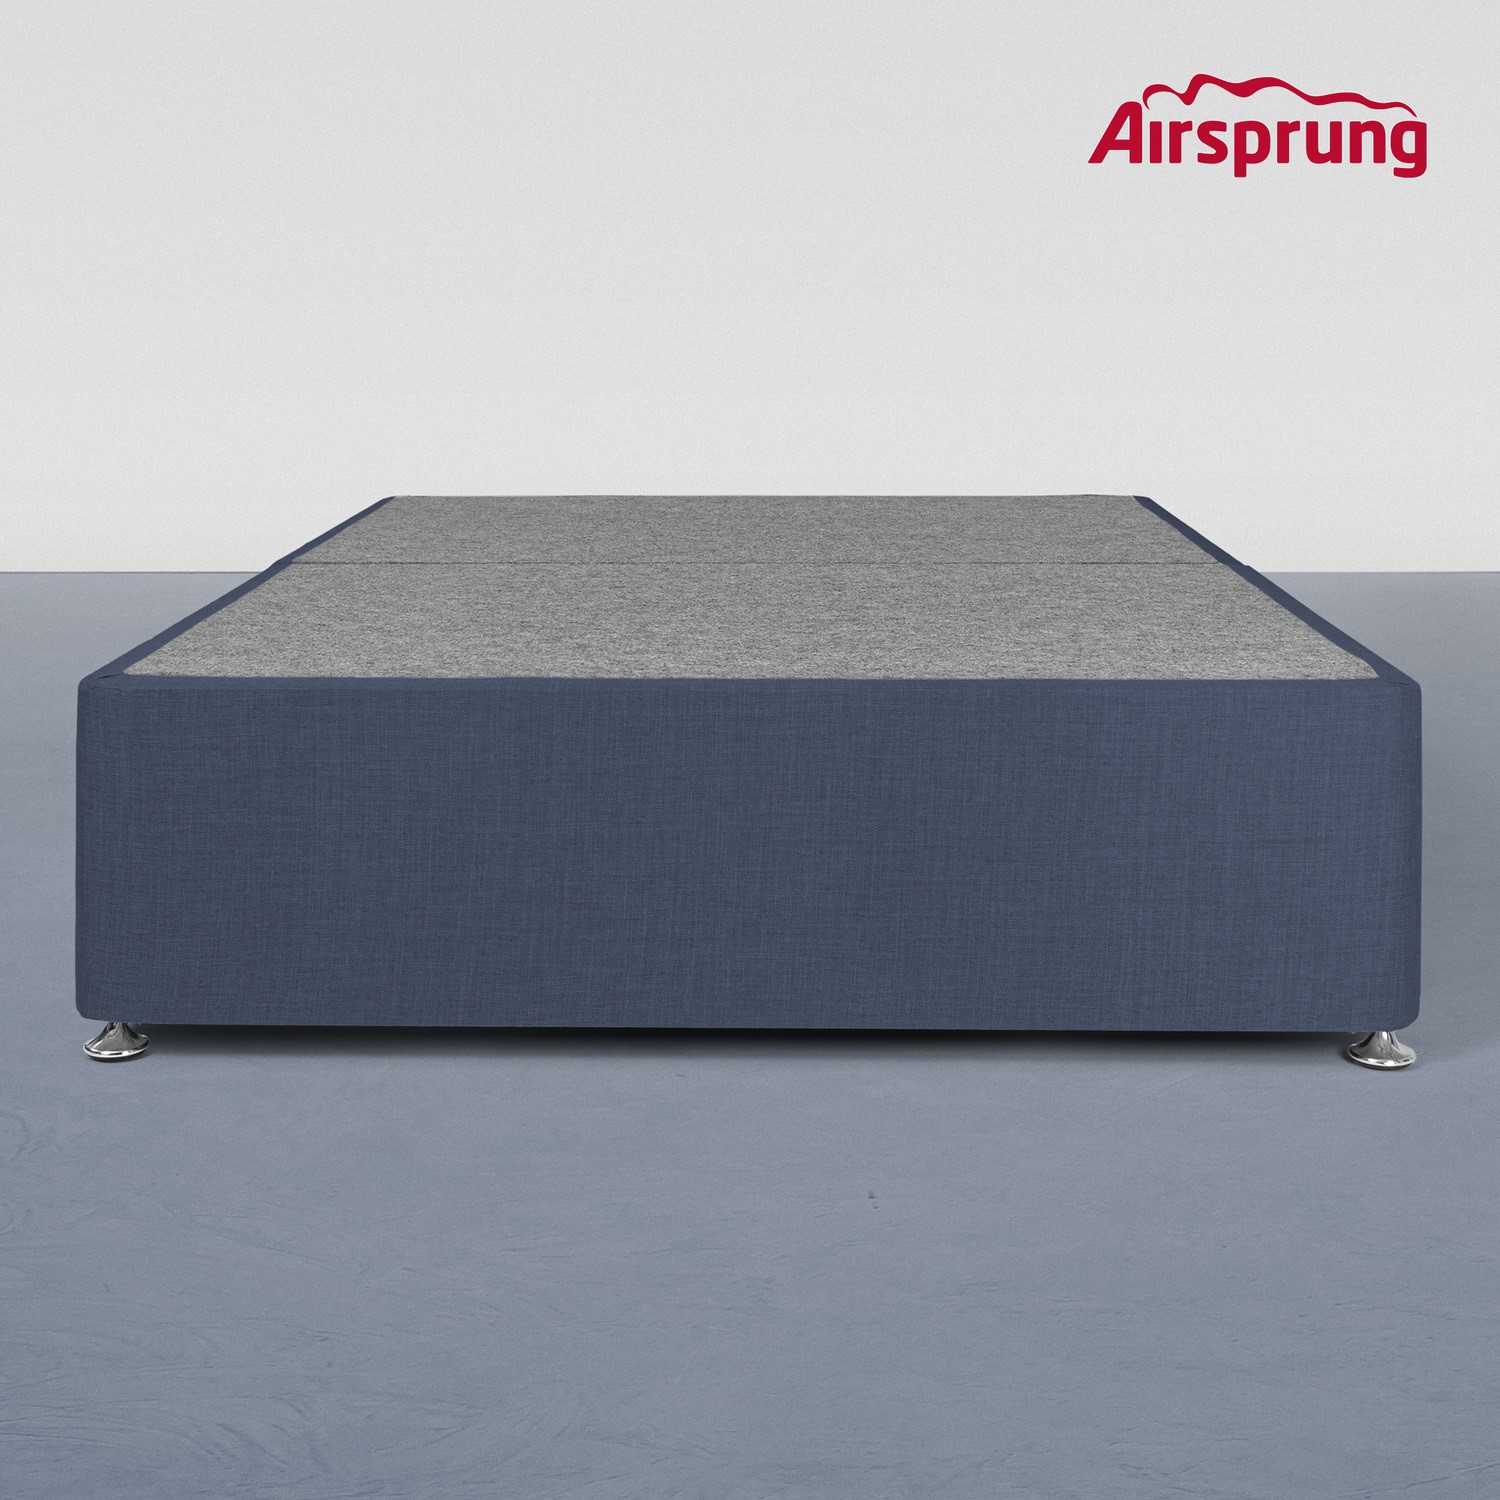 Read more about Airsprung kelston small double 2 drawer divan midnight blue